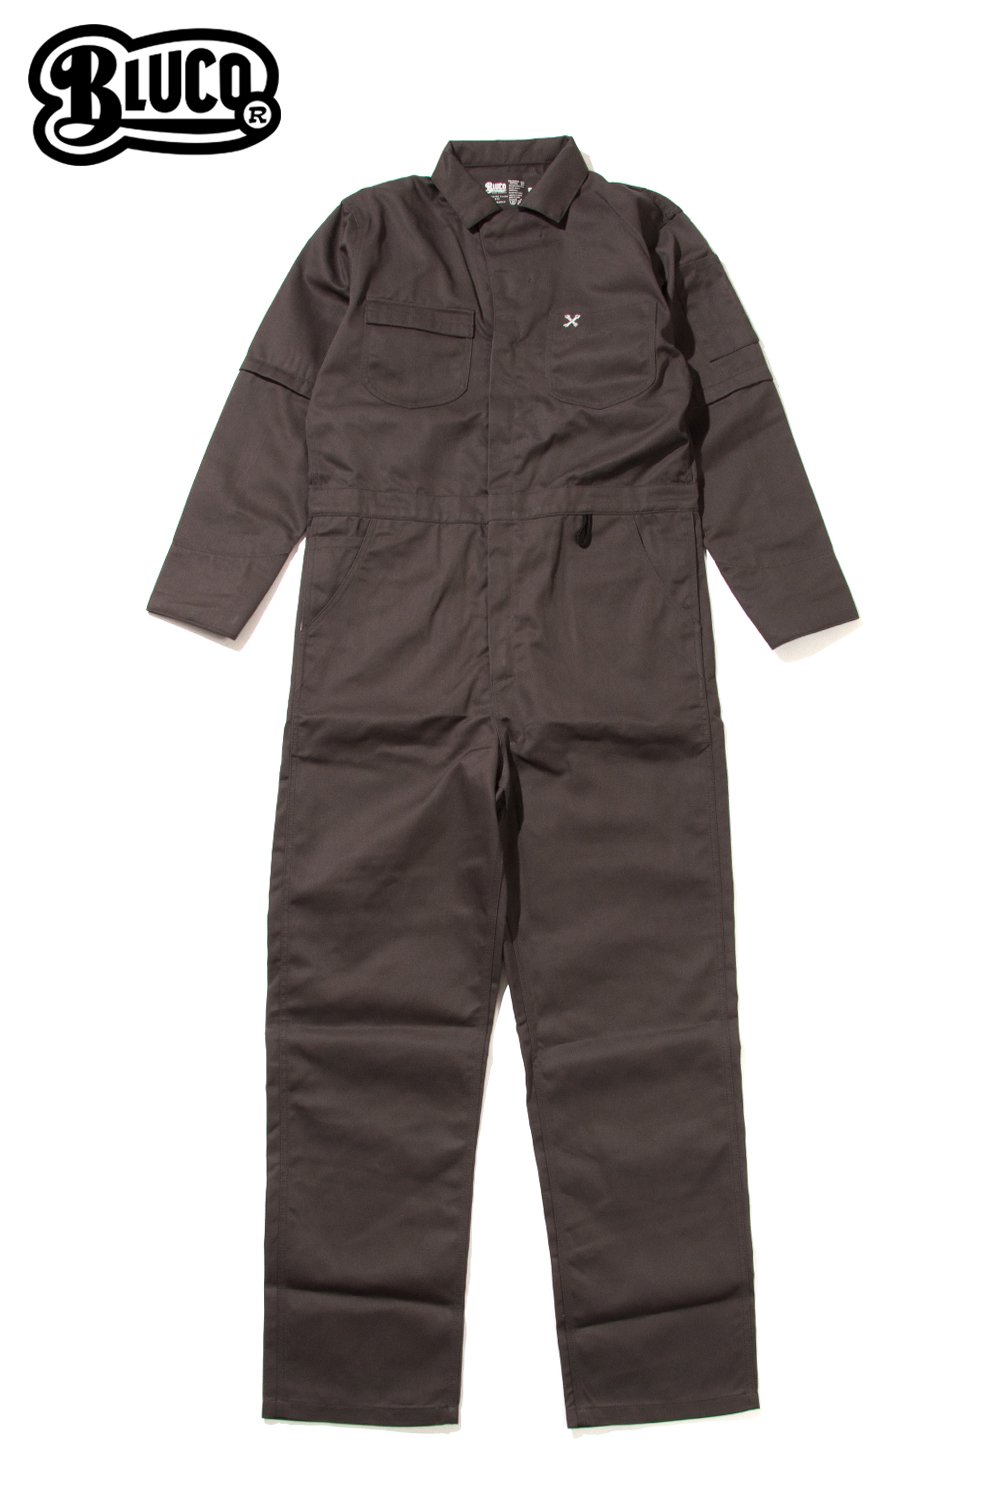 BLUCO(ブルコ) カバーオール つなぎ OL-006 DELUXE COVERALL 通販正規 